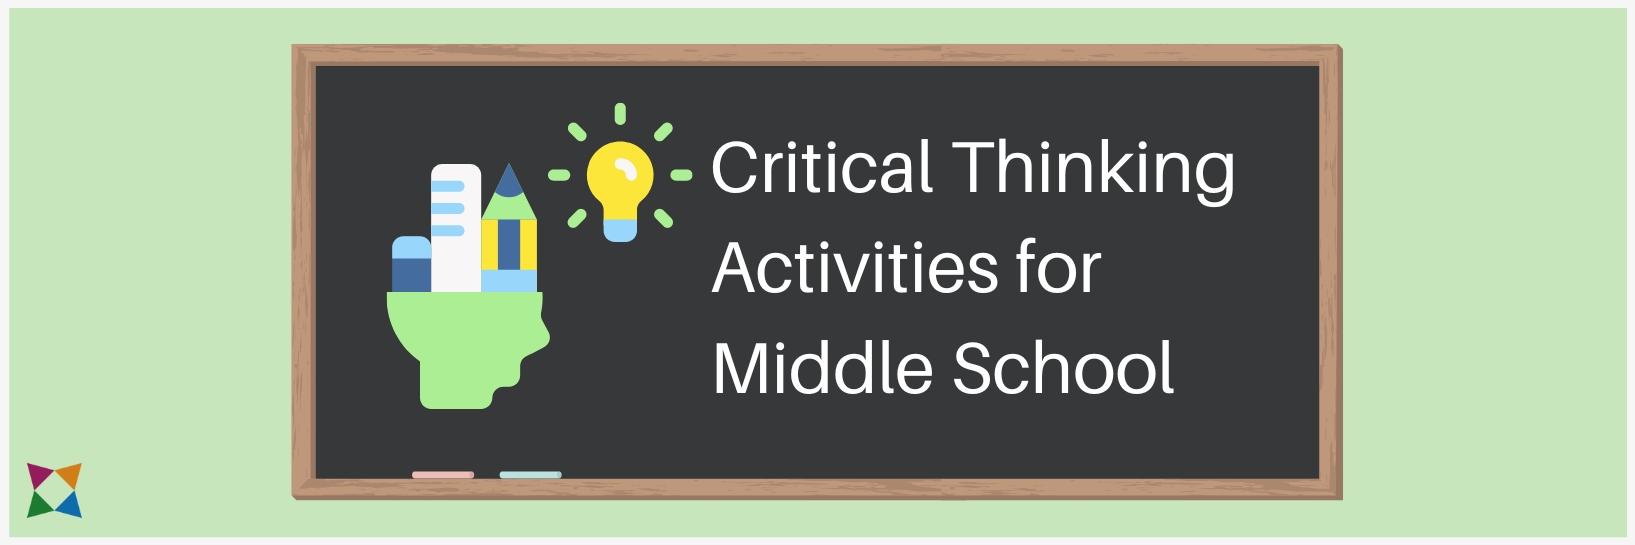 critical thinking activities for elementary school